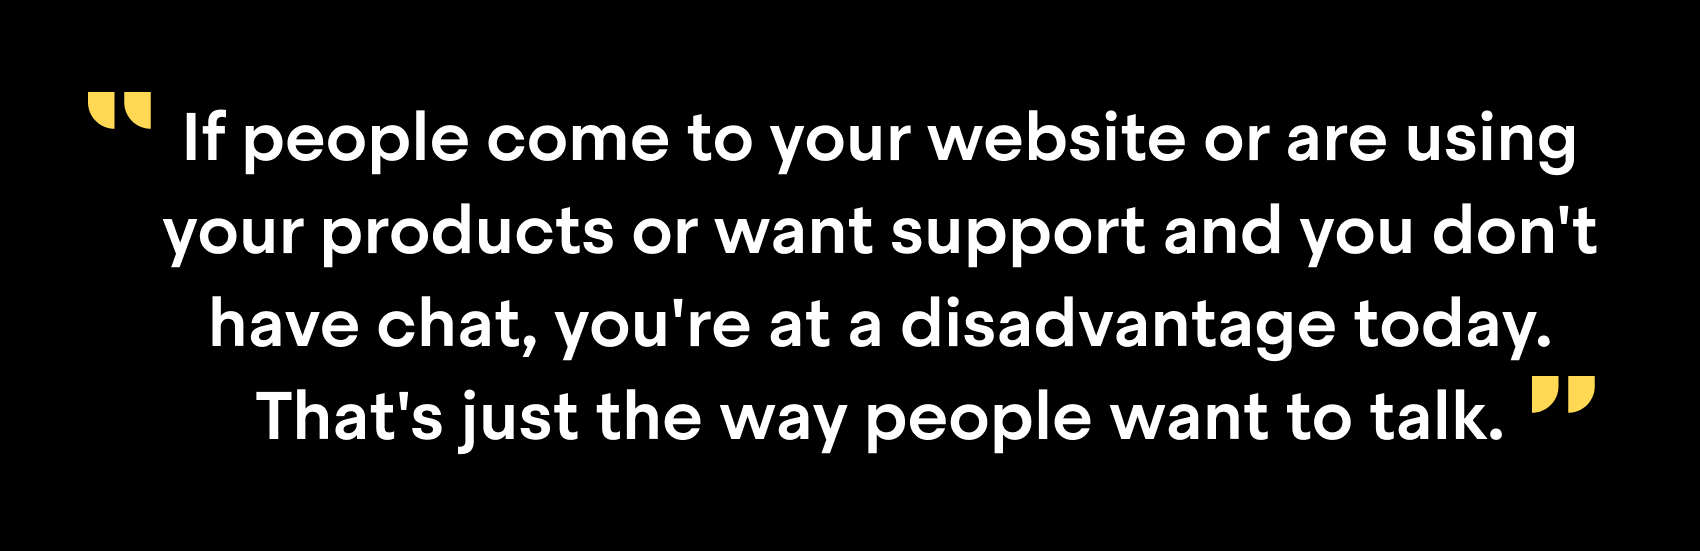 "If people come to your website or are using your products or want support and you don't have chat, you're at a disadvantage today. That's just the way people want to talk."